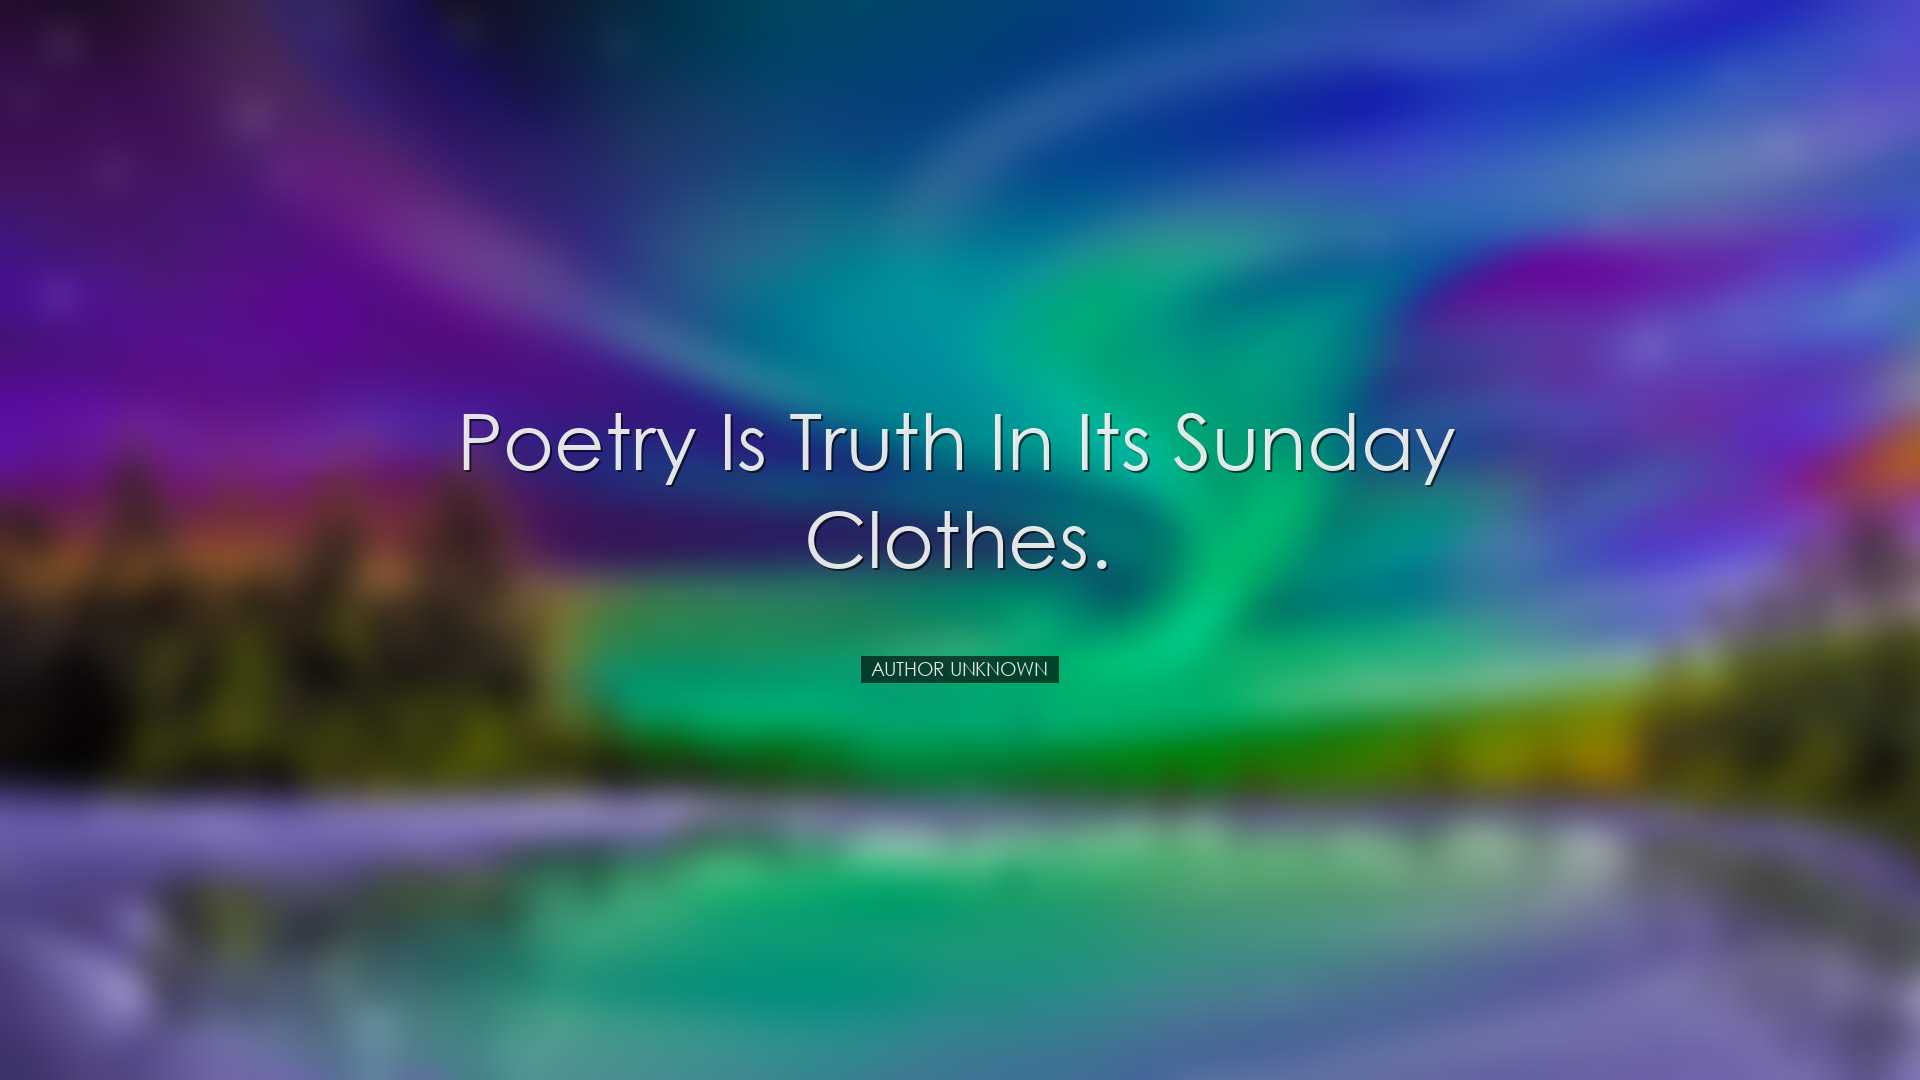 Poetry is truth in its Sunday clothes. - Author Unknown